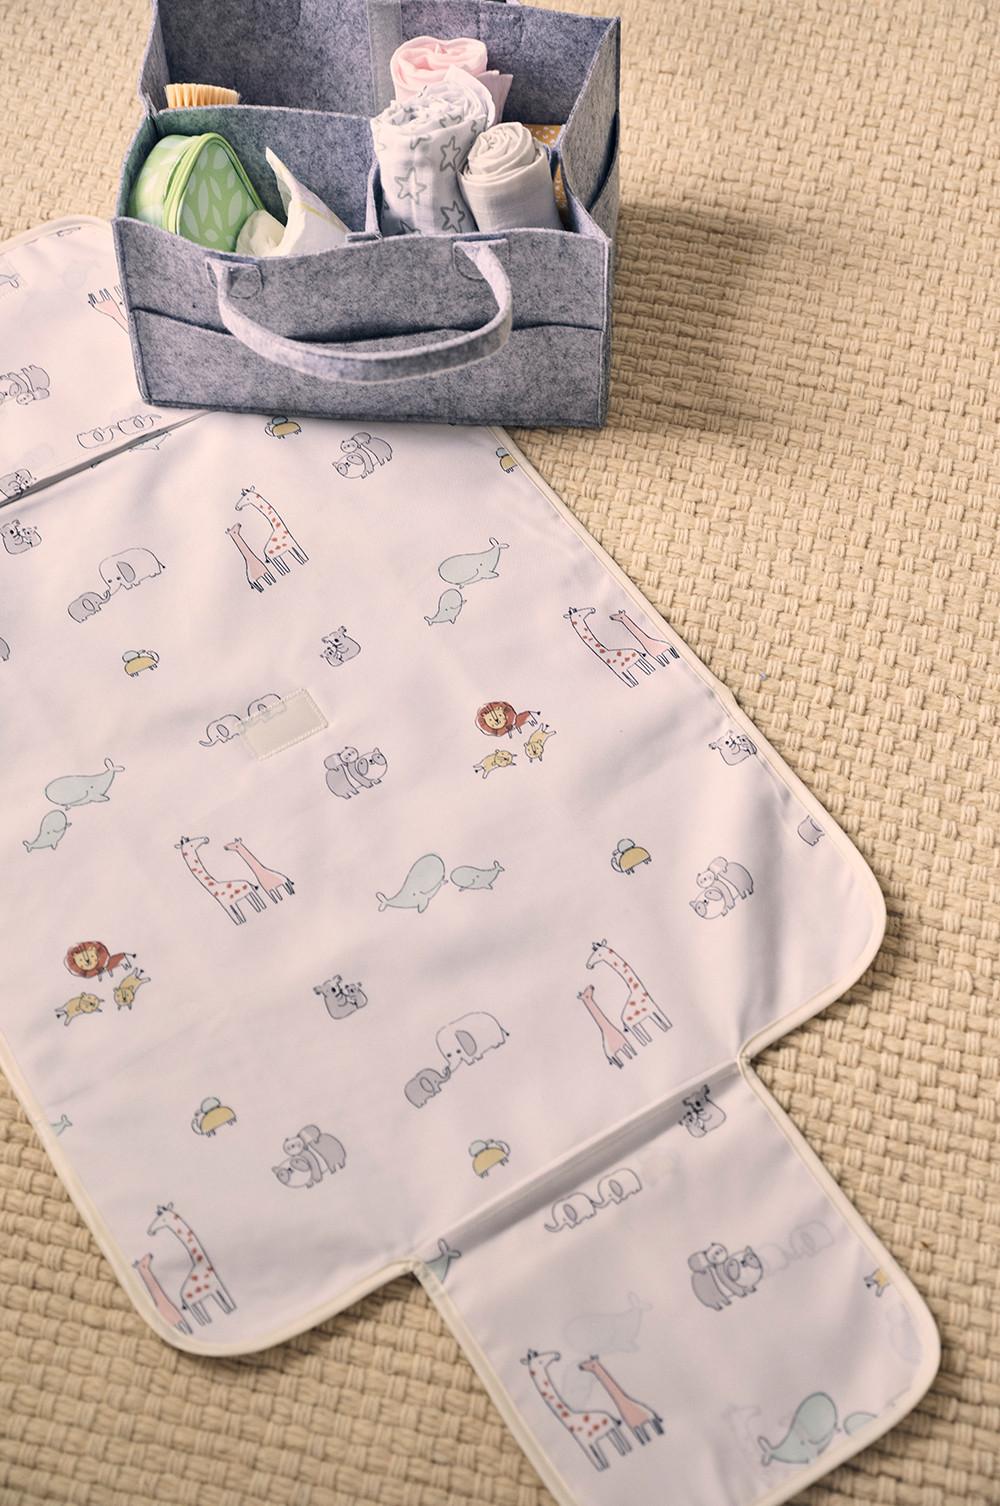 Baby changing mat and baby accessories